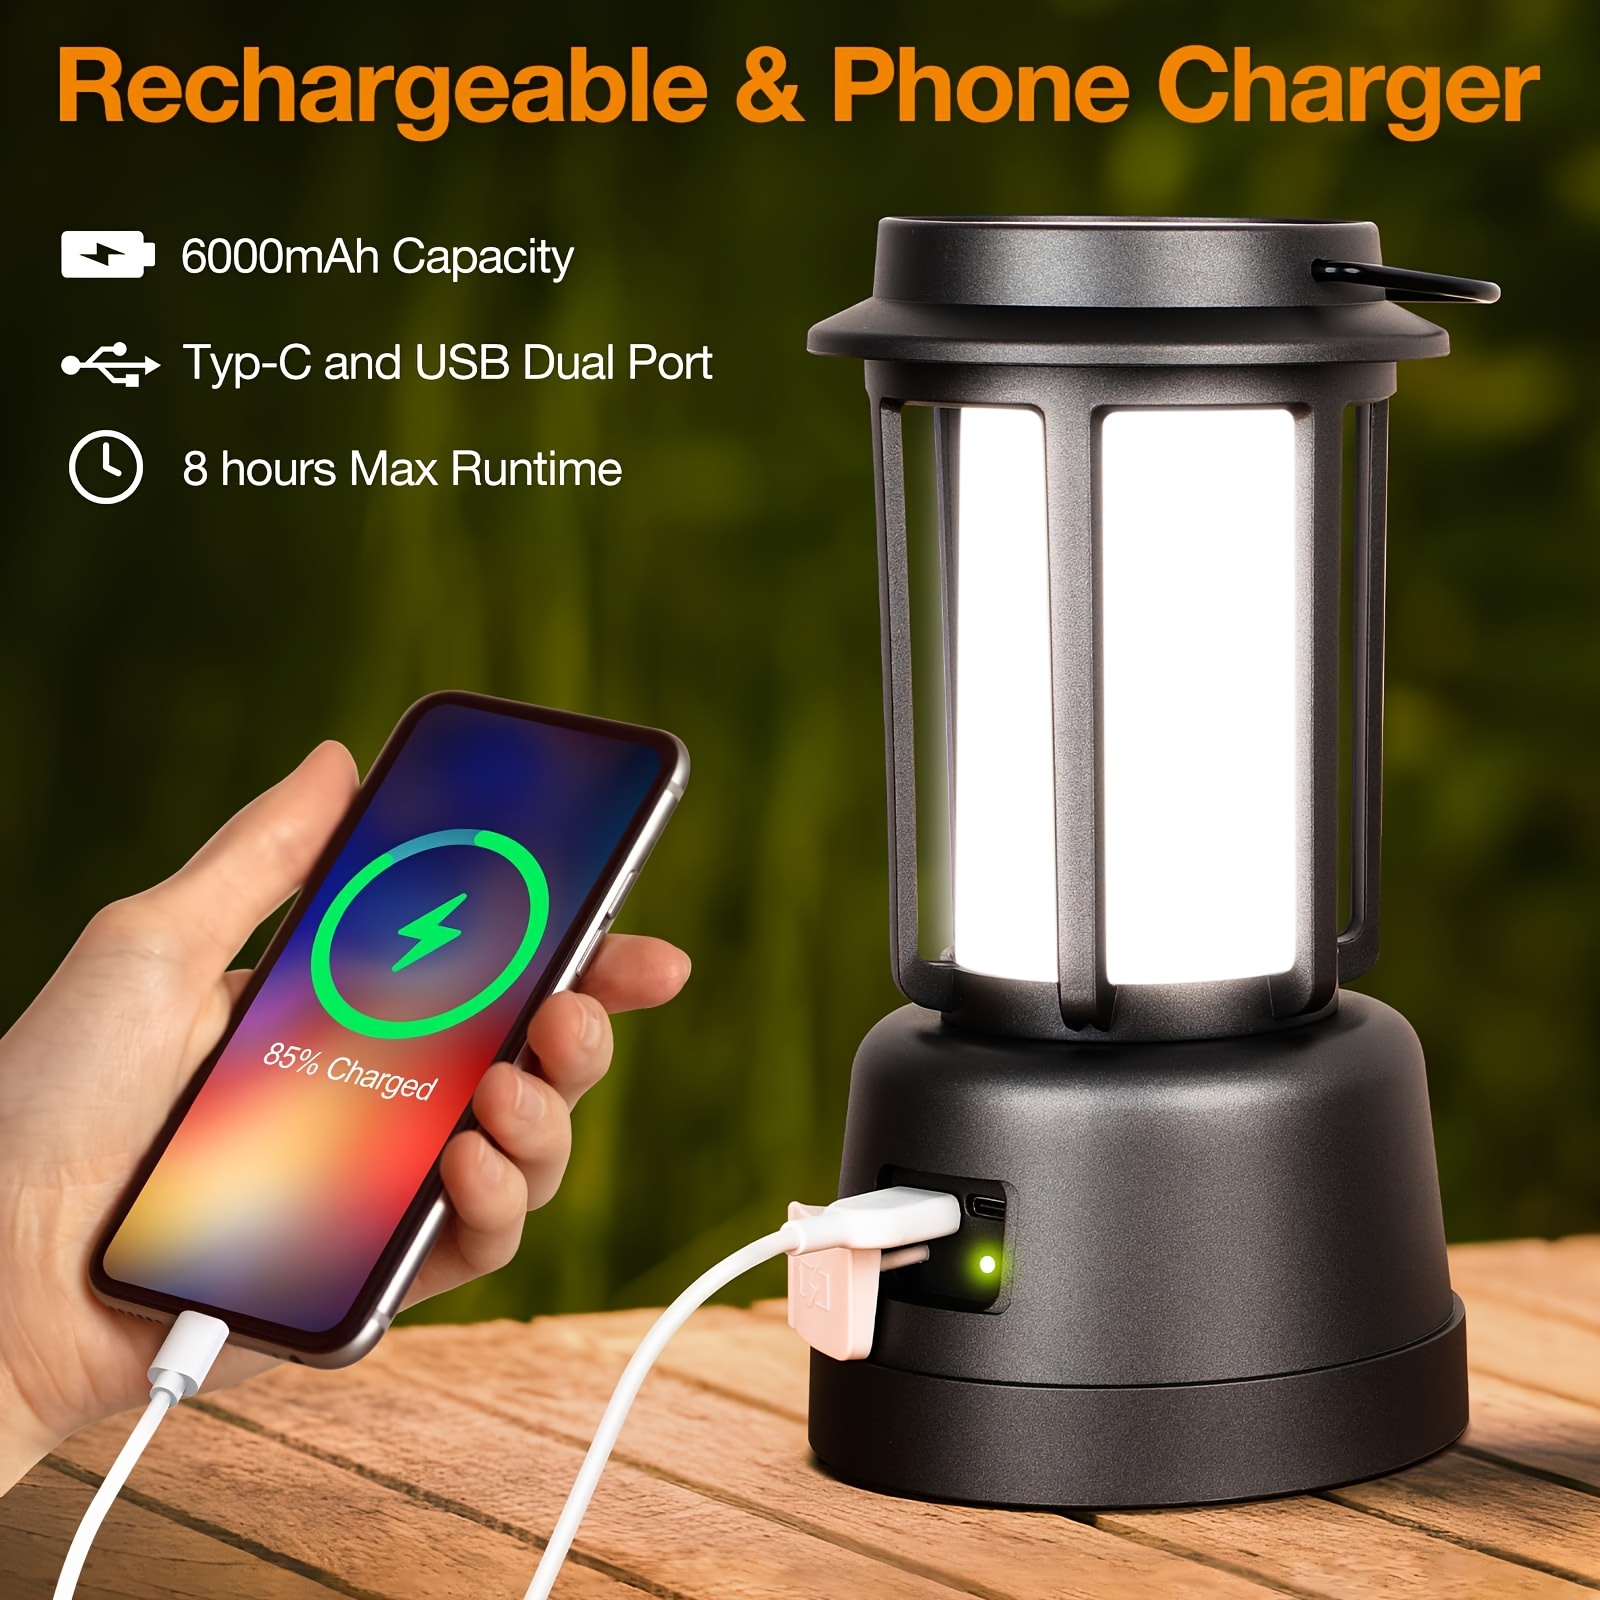 

Lights, Camping Lights, Power Outage Lantern 6000mah, Hand Crank Rechargeable Camping Lantern, Solar Powered Lantern, Hurricane Survival Tools And Gear